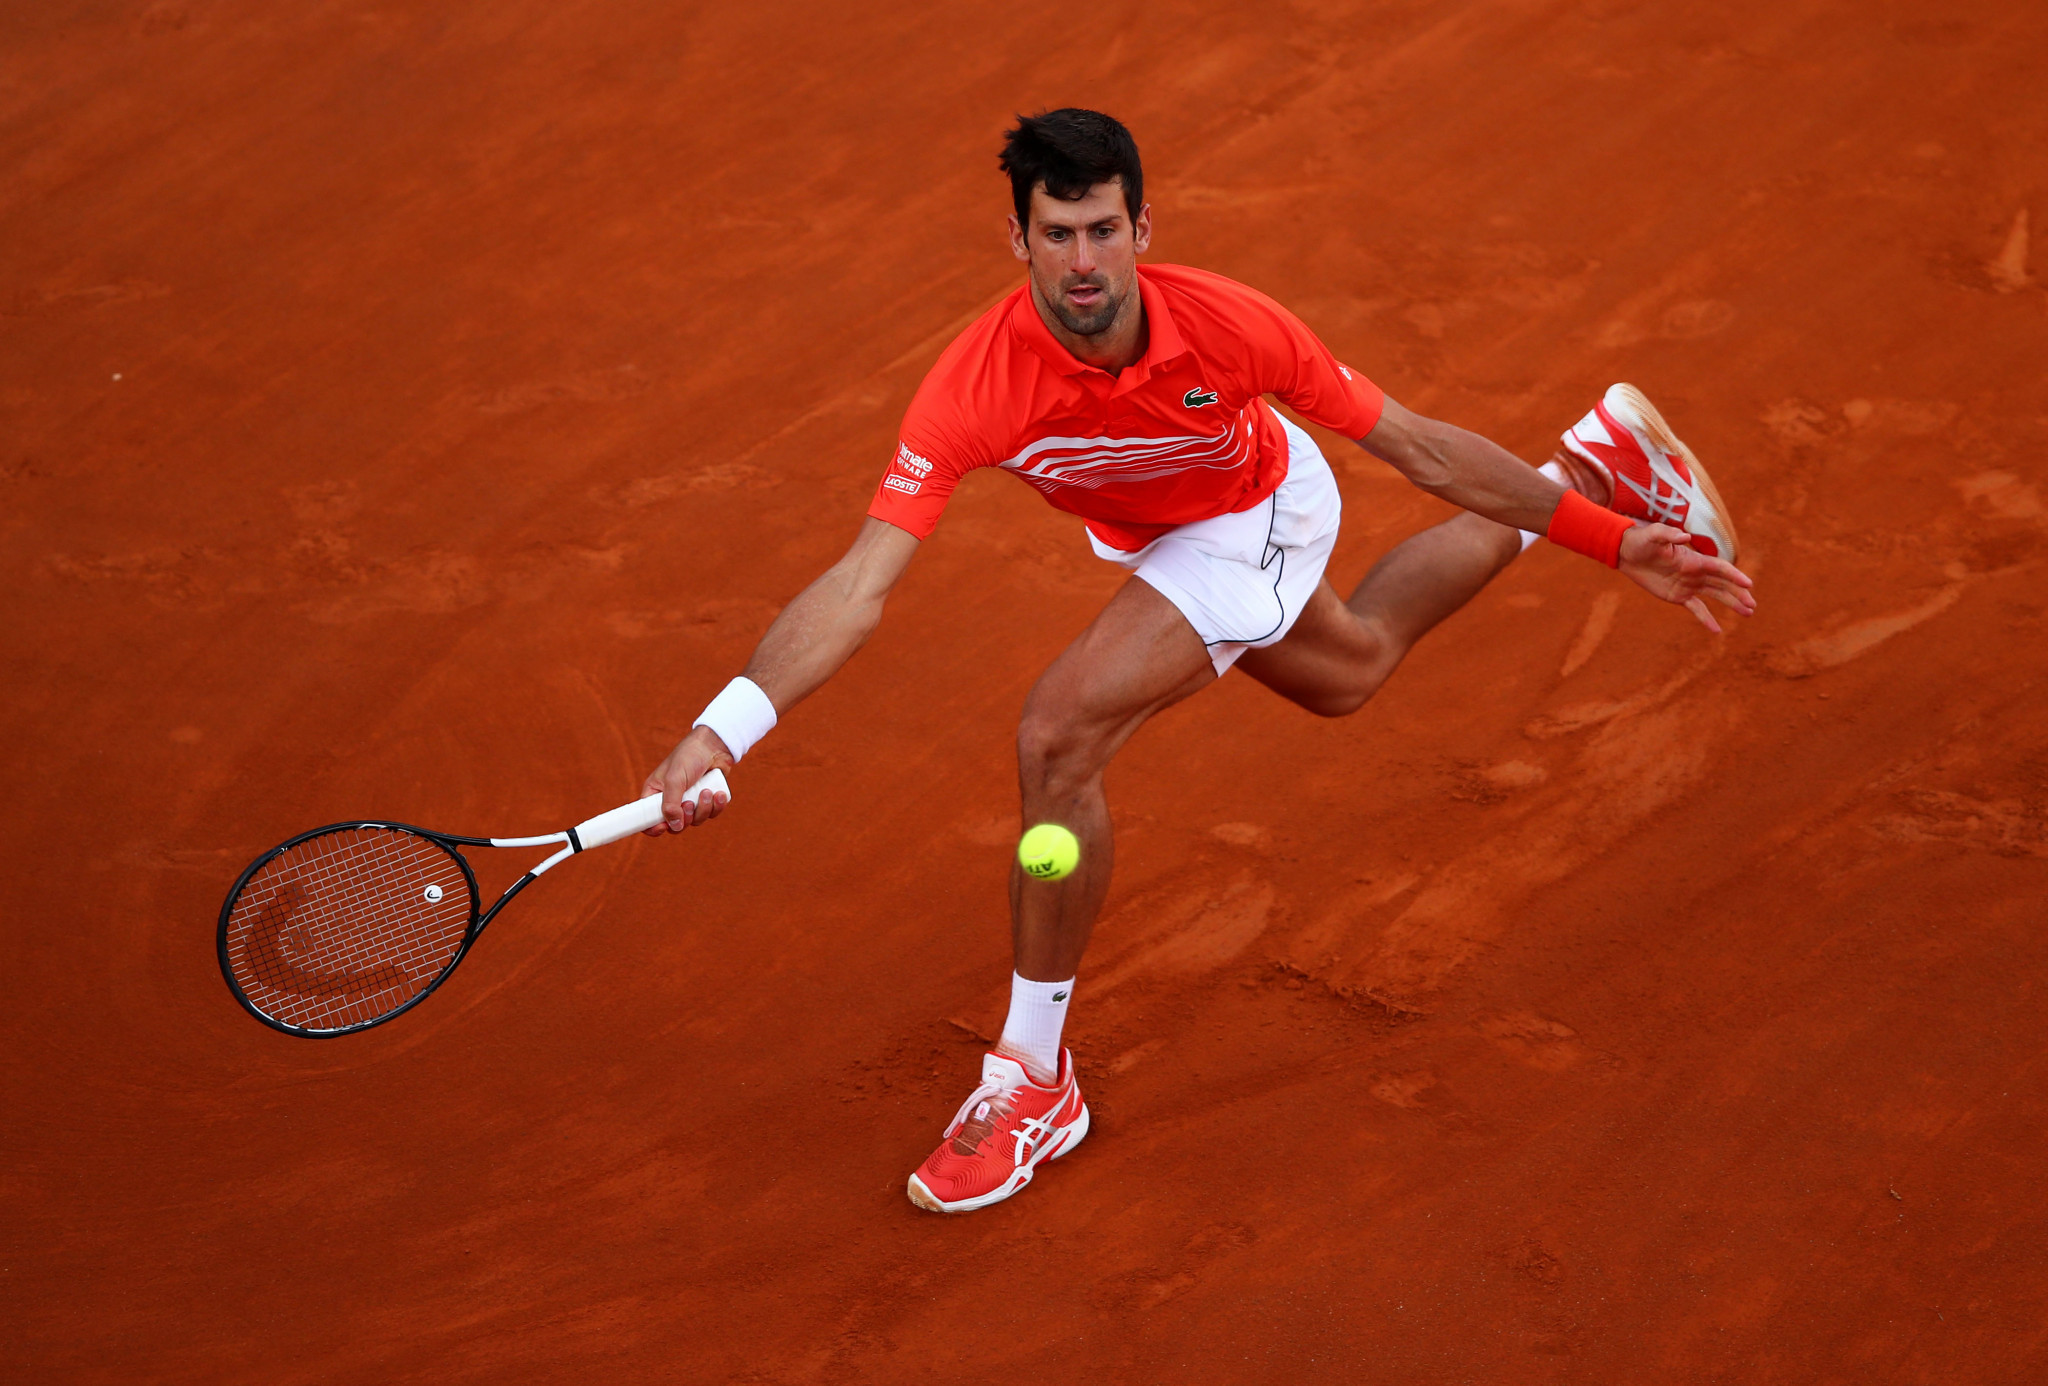 Djokovic targets fourth consecutive Grand Slam victory at French Open 